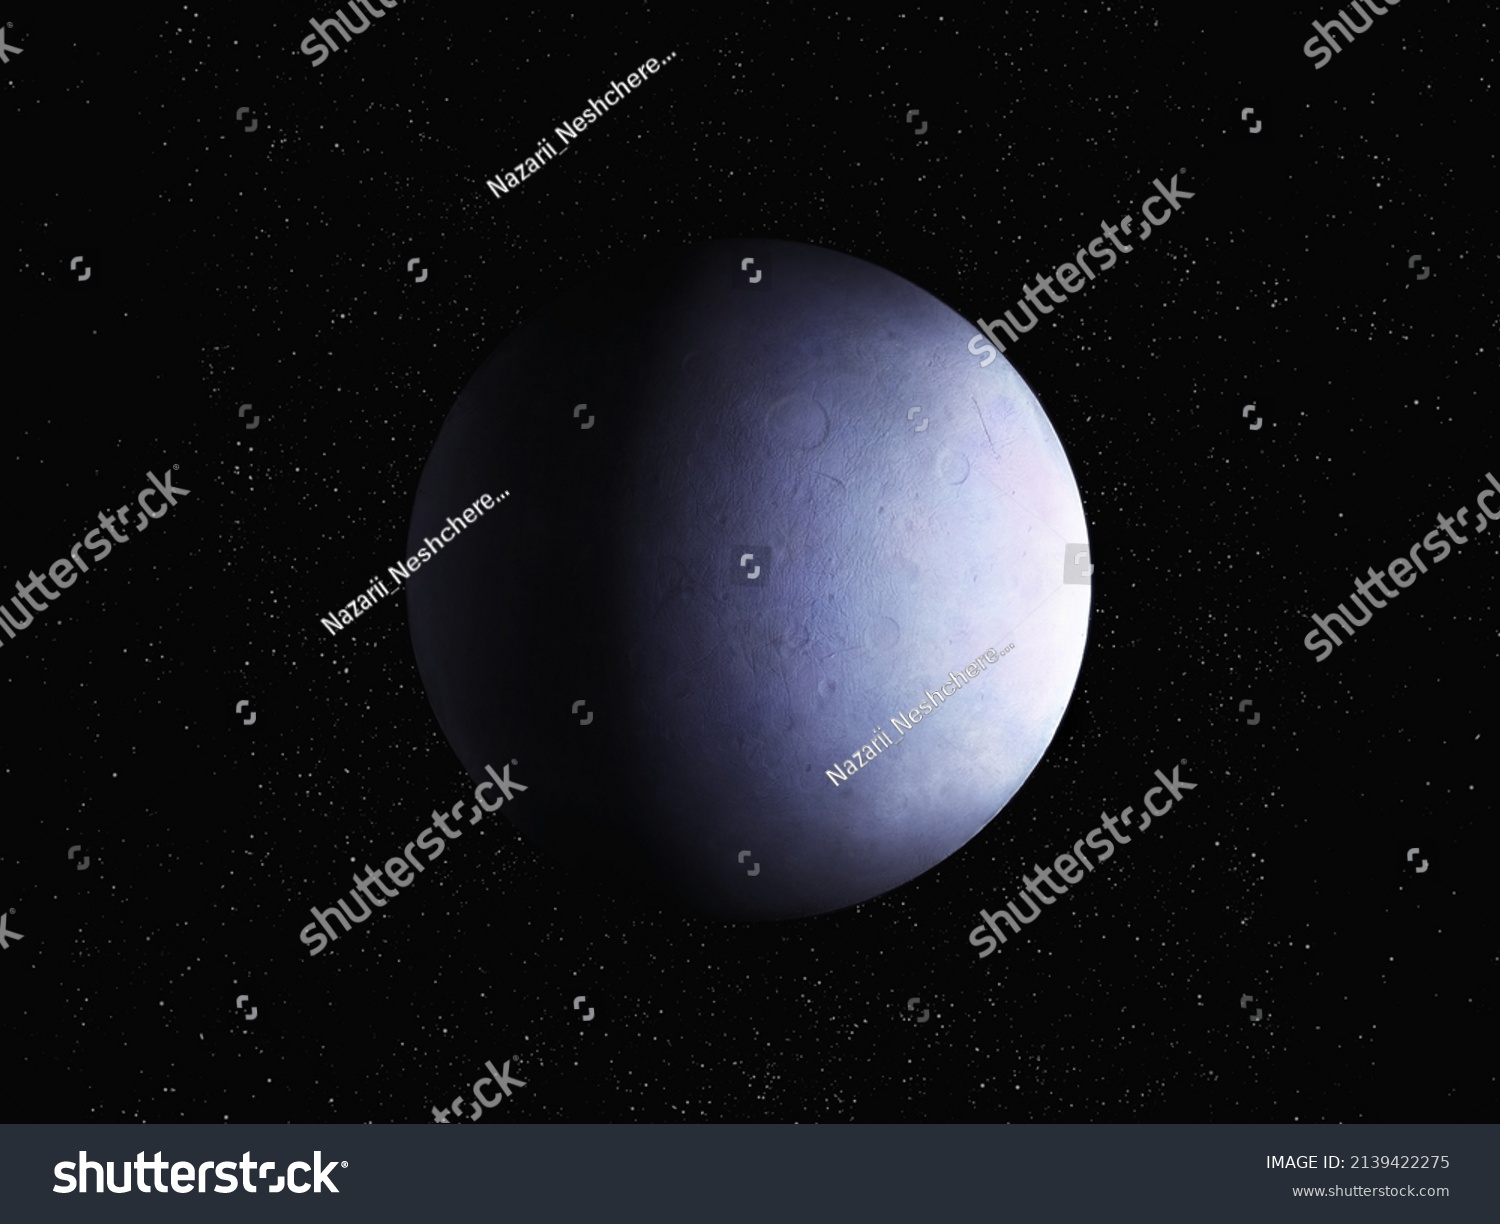 Stone planet with a solid surface on a black background with stars. Large secondary planet covered with ice.  #2139422275